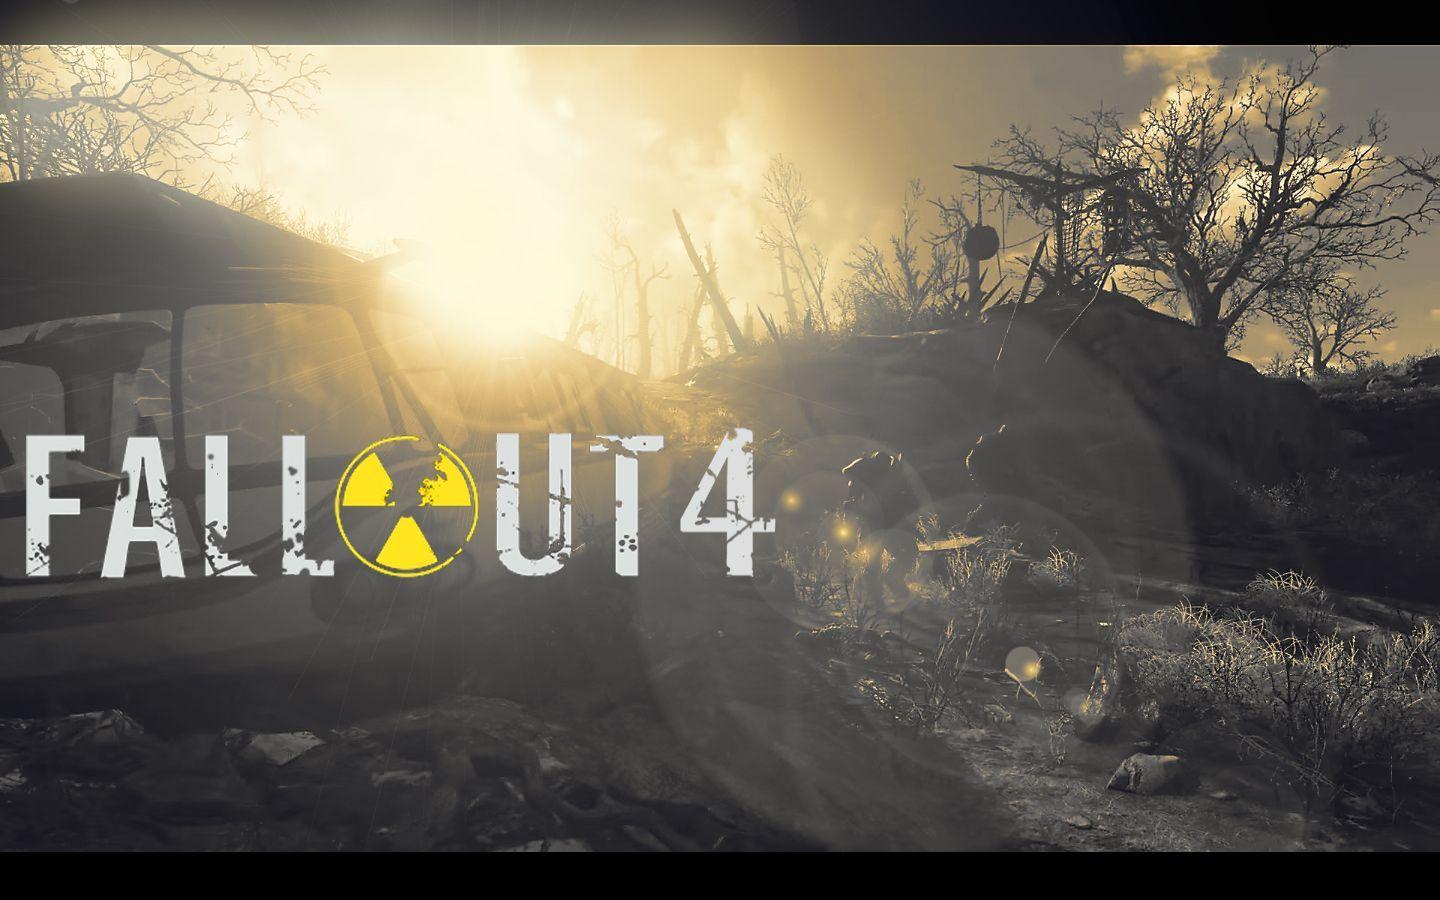 Final Fallout 4 Background Image. Fallout, Finals